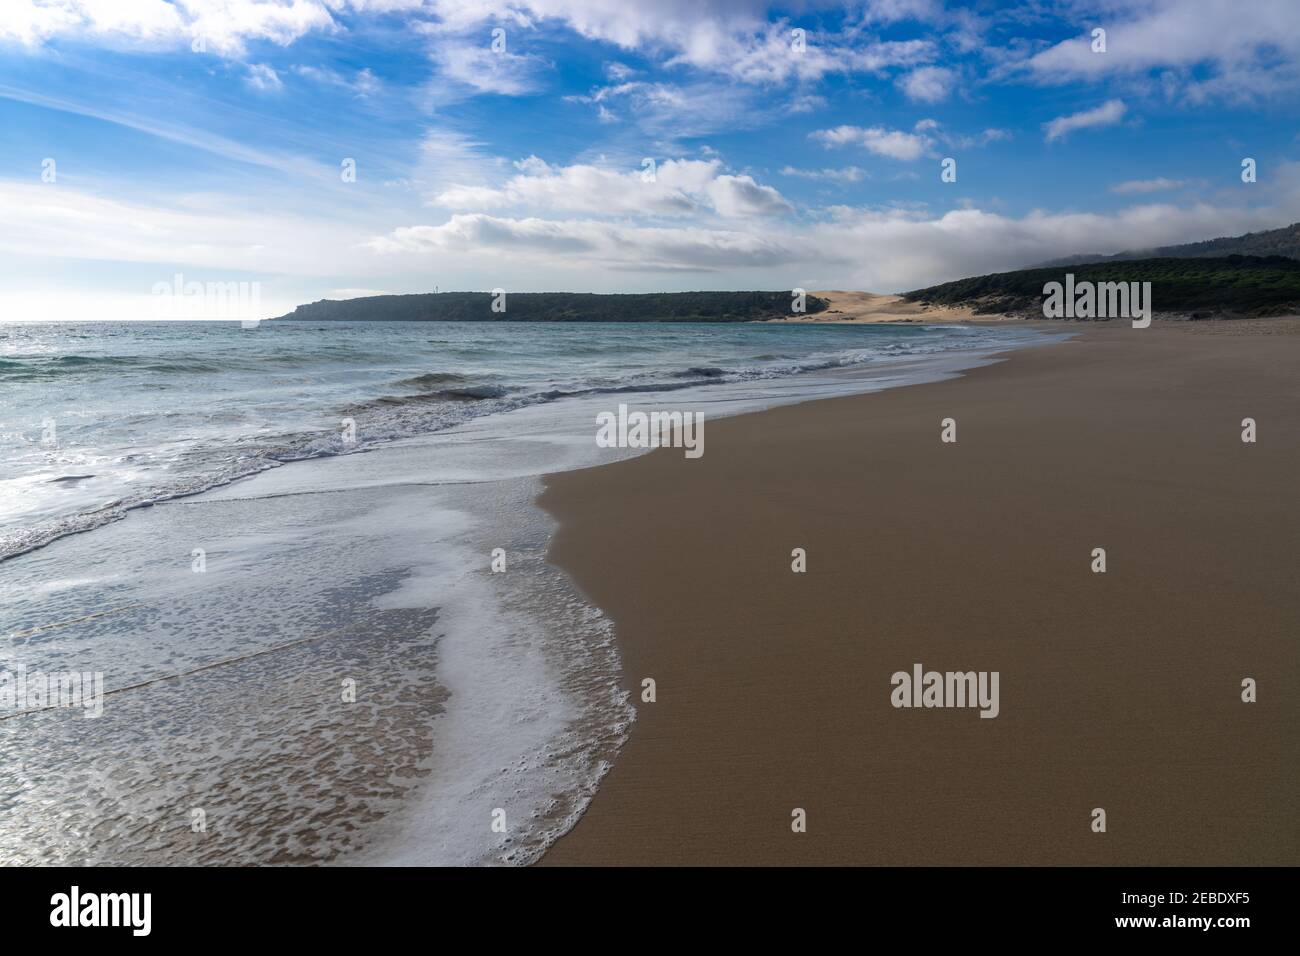 A peaceful empty golden sand beach with waves rolling in and pine forest and a large sand dune in the background Stock Photo